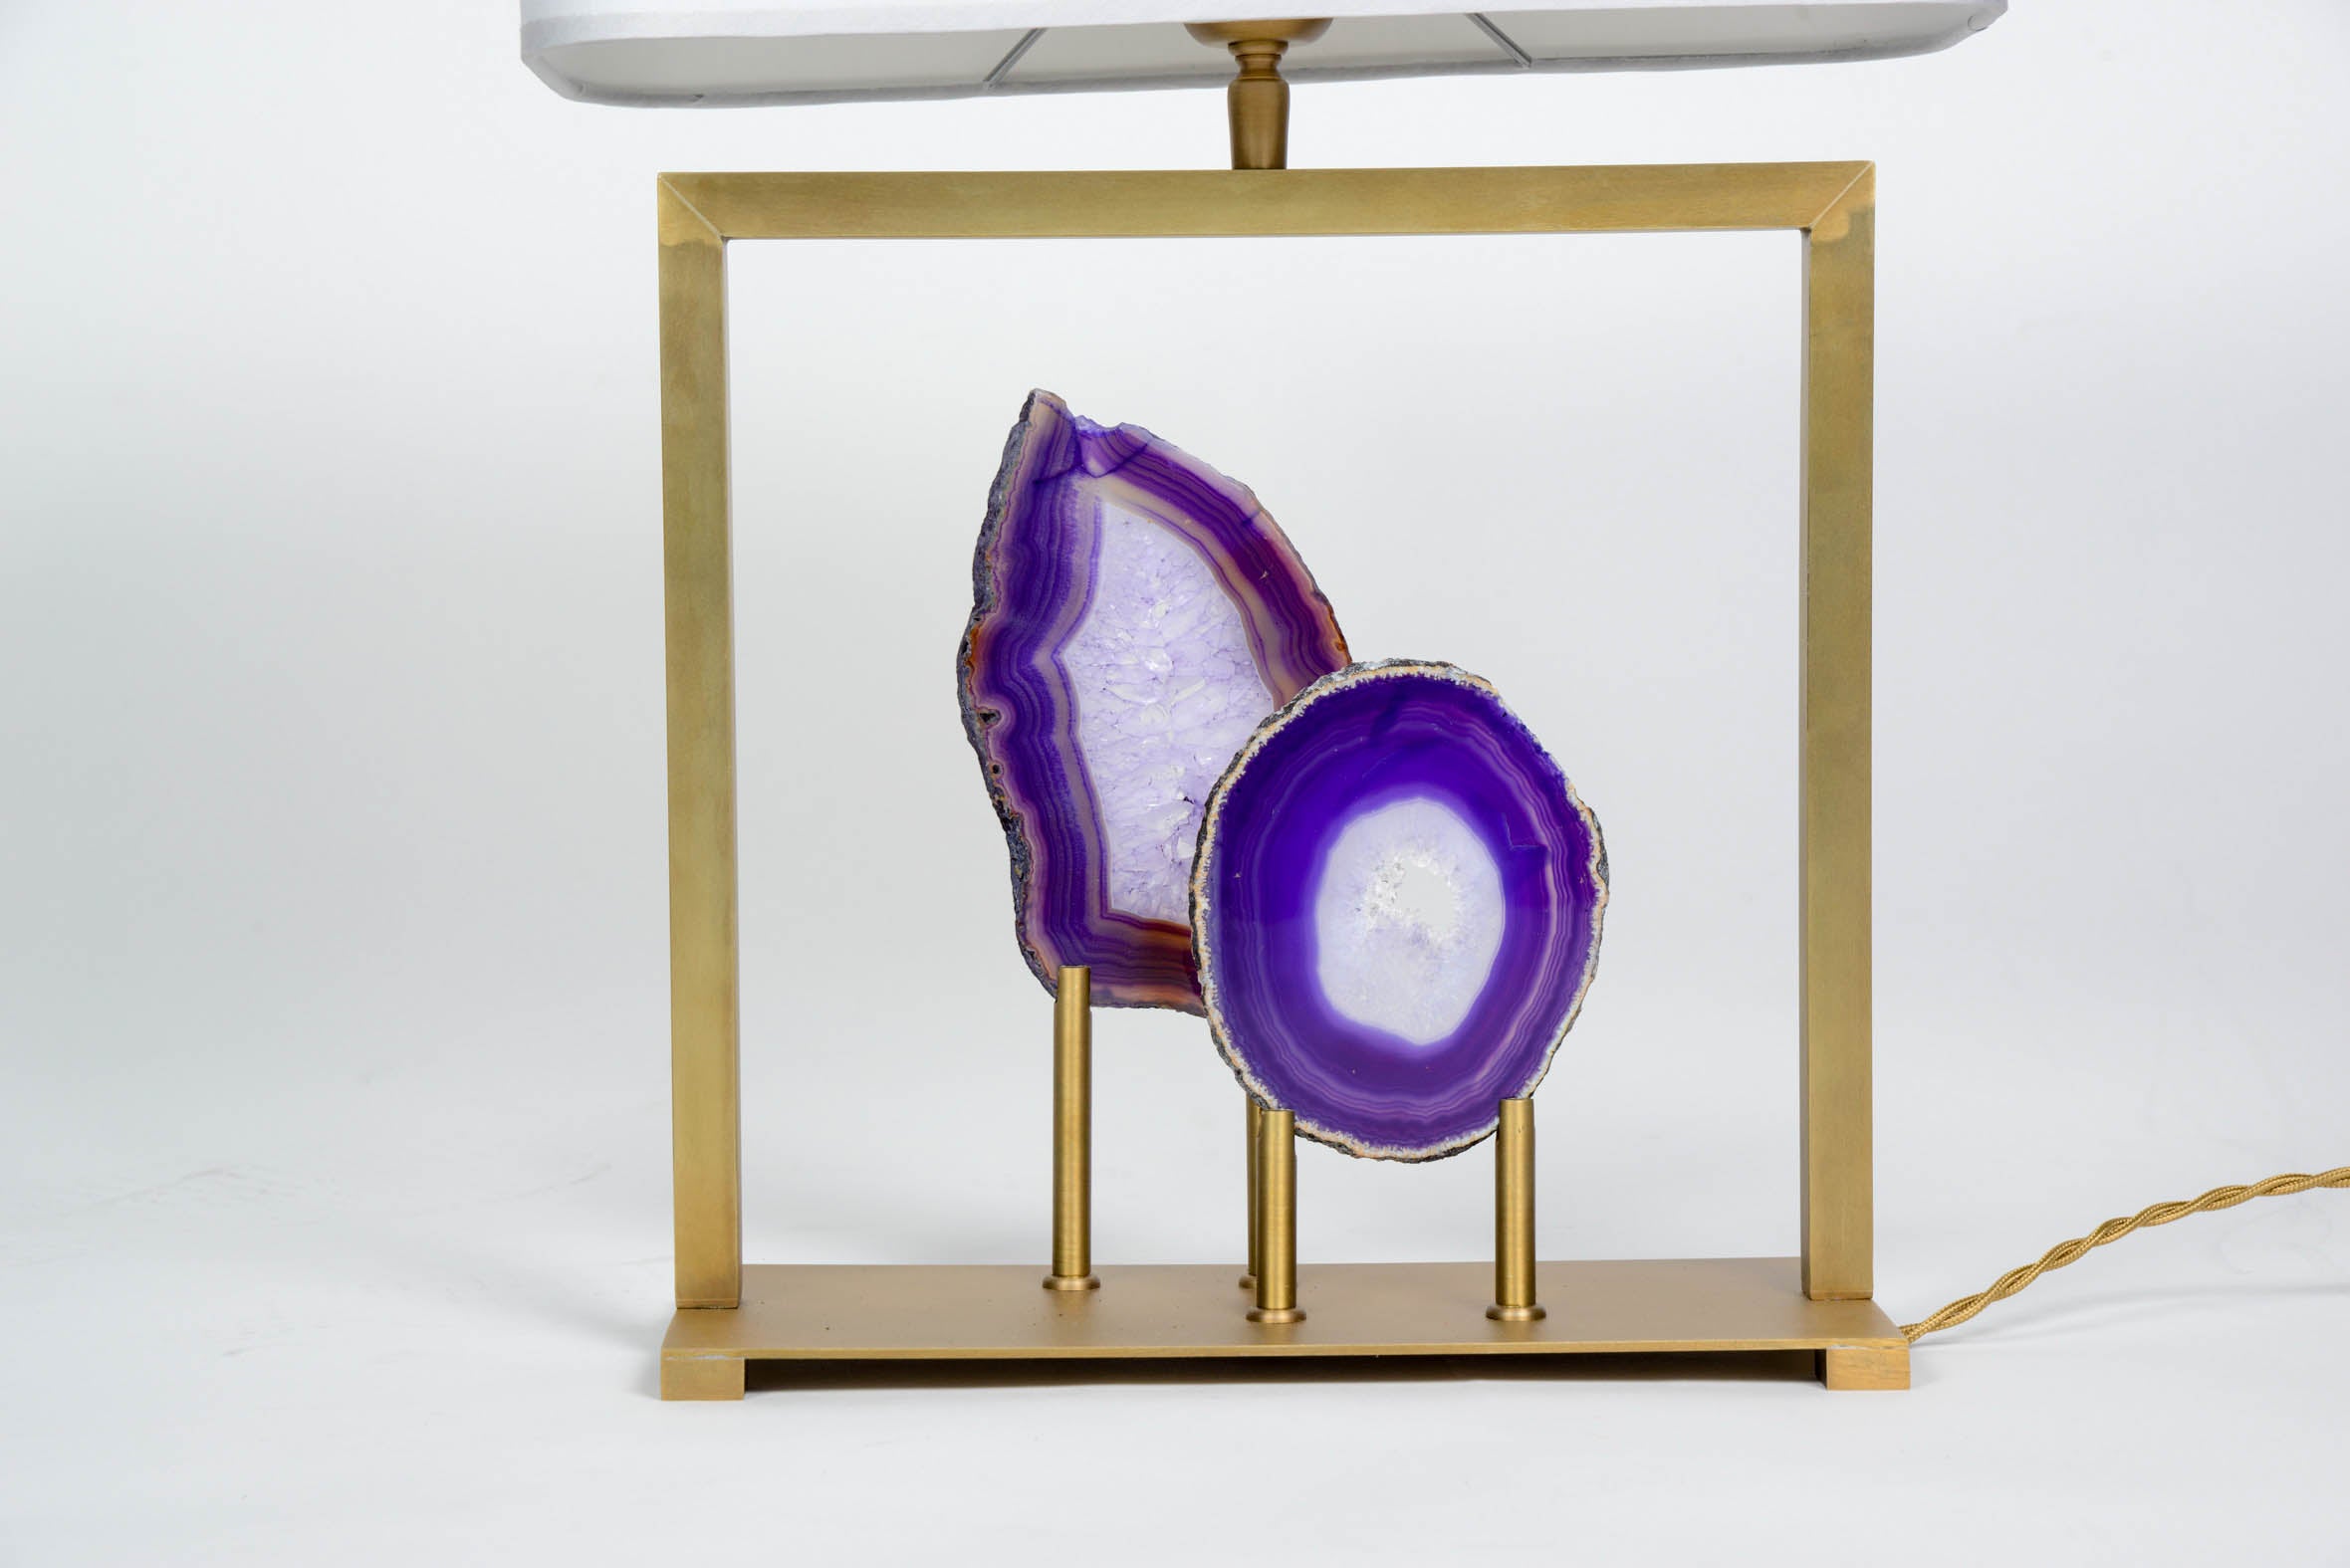 Charming small lamp made of a polished brass frame setting two slices of purple agates.

Glustin Luminaires creation.

New electrification, can be rewired for american standards.